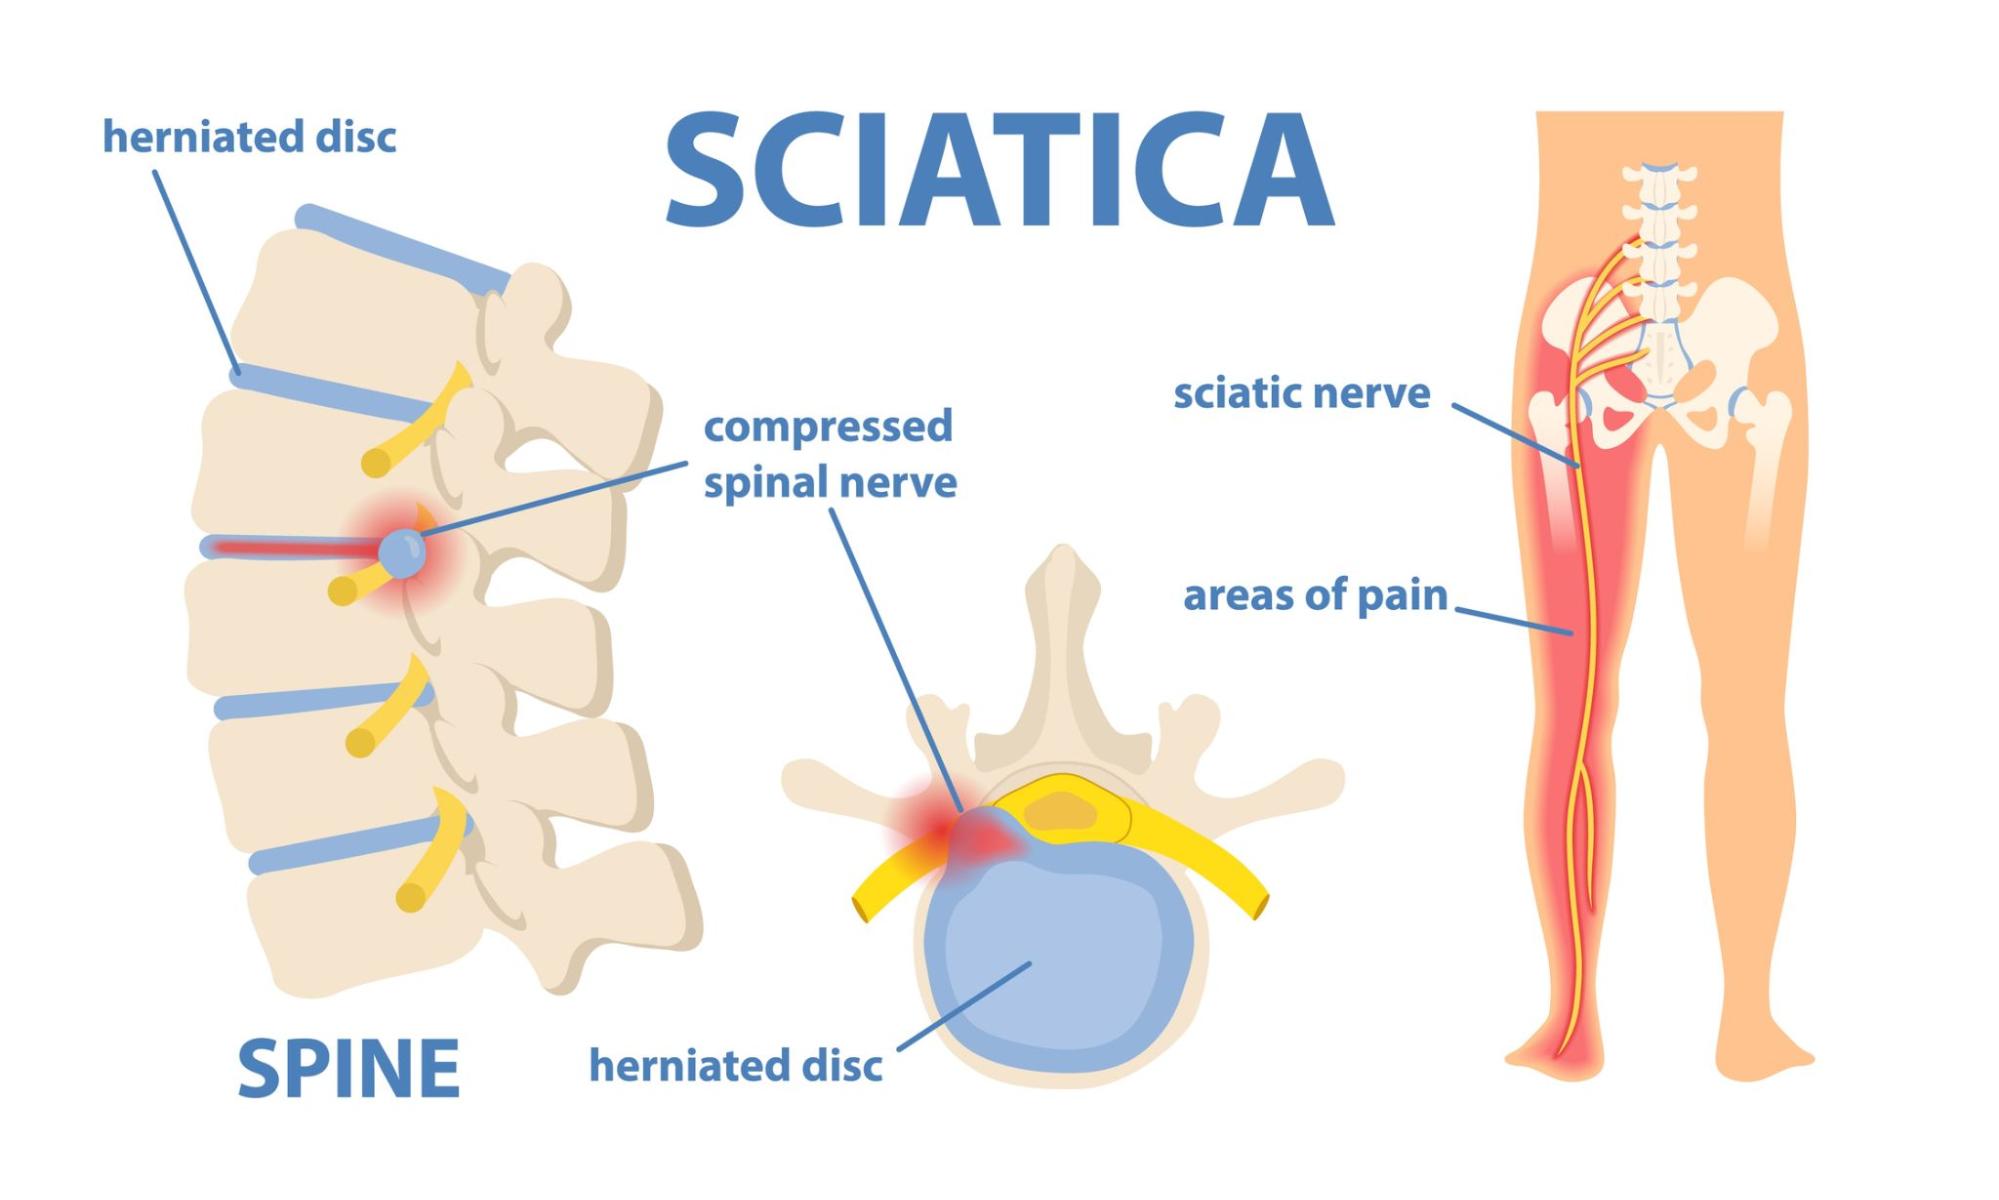 Five Ways to Diagnose Sciatica  How To Tell If You Have Sciatica